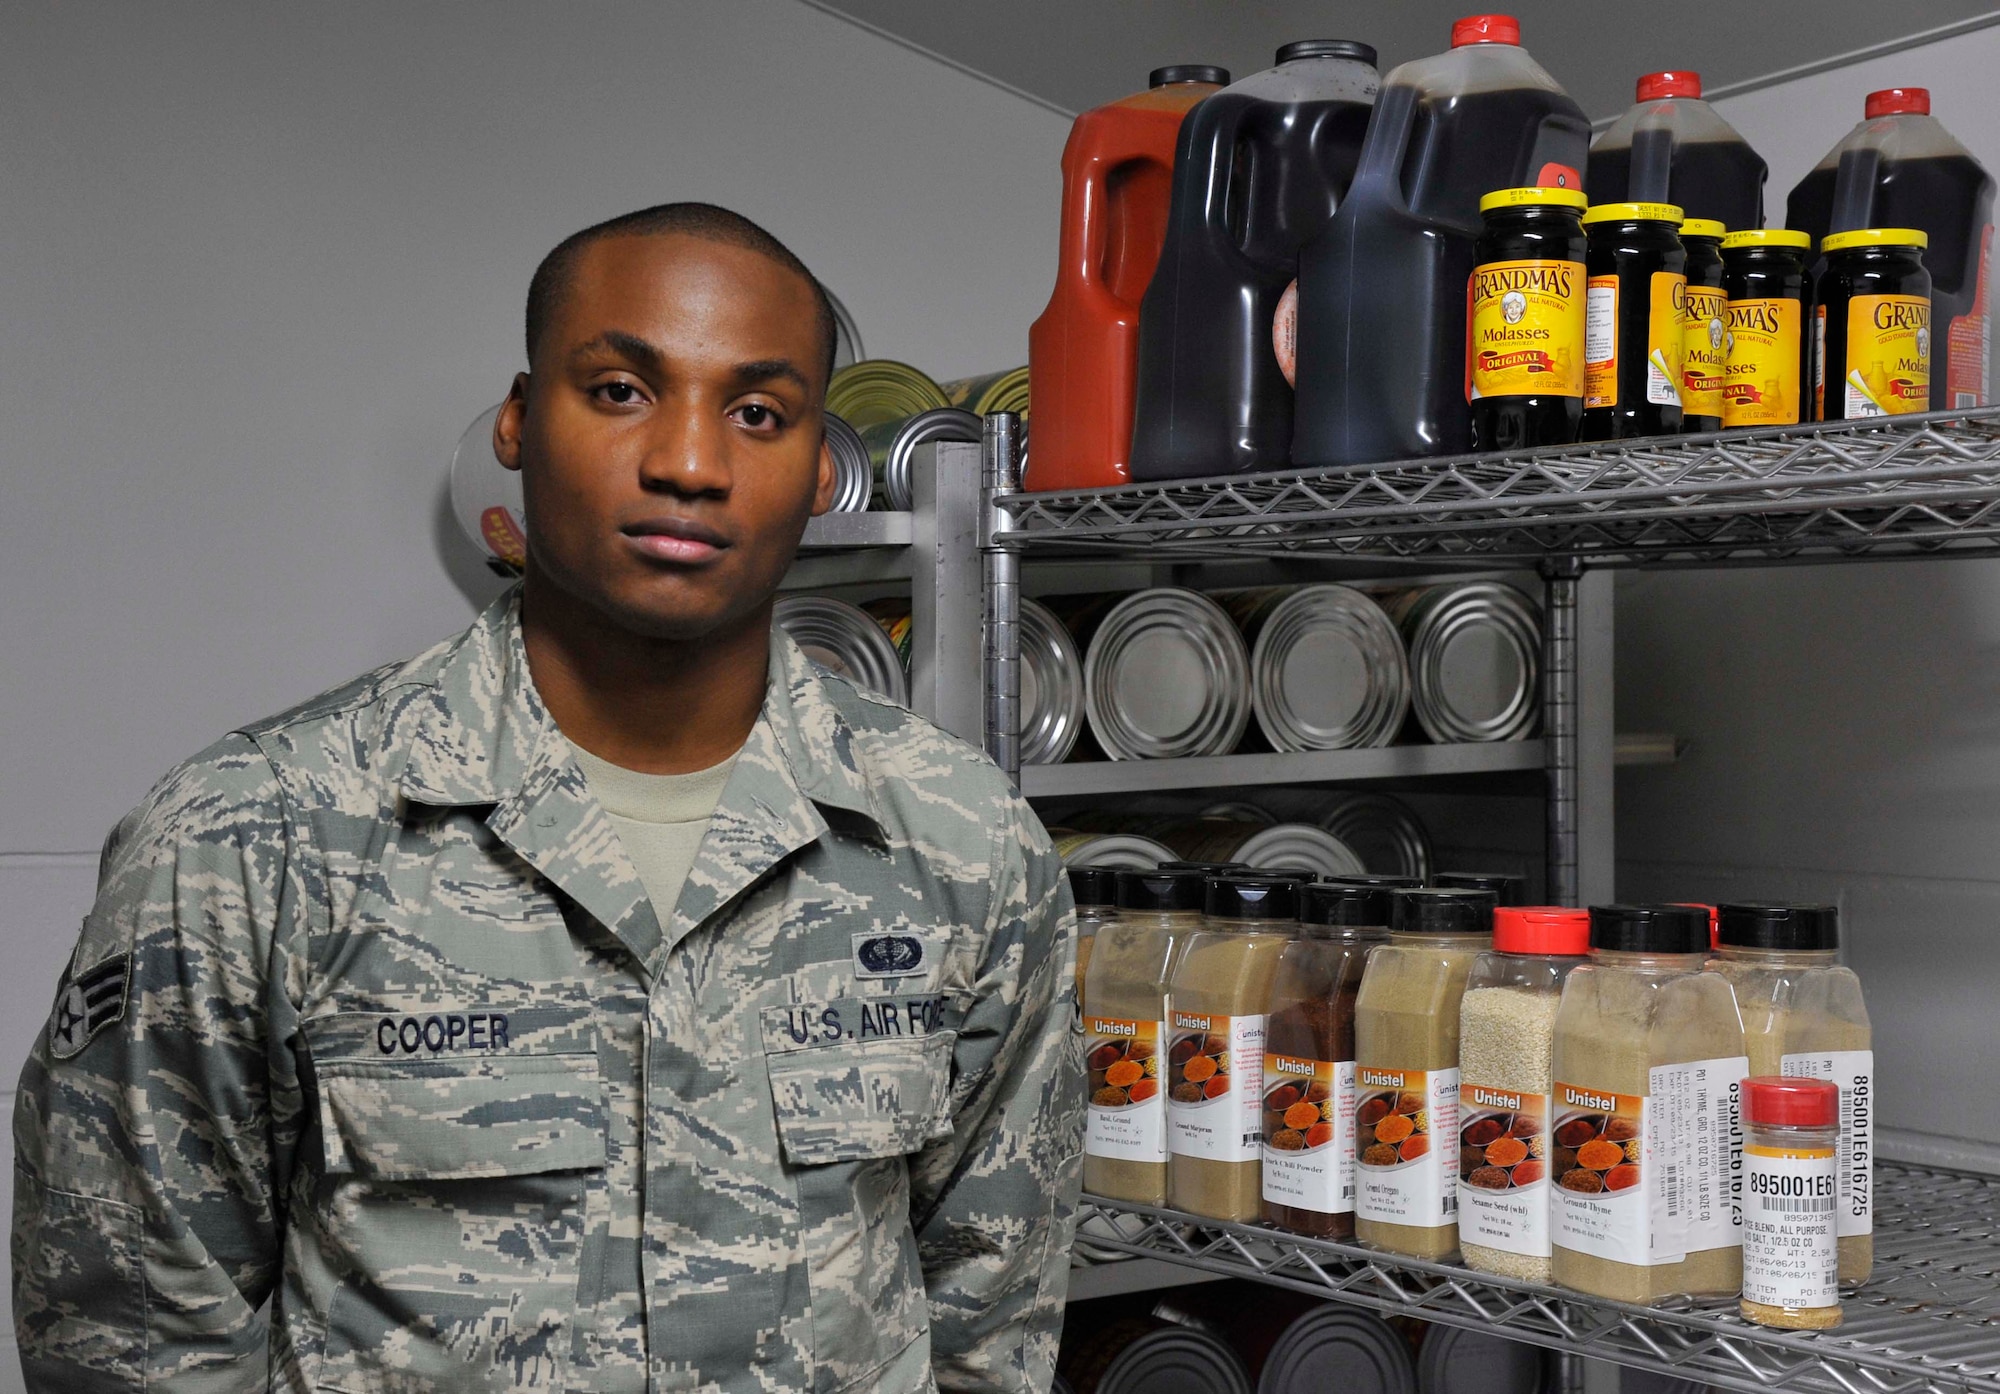 U.S. Air Force Senior Airman DeQuinn Cooper, 35th Force Support Squadron Falcon Feeder store room manager, stands in an inventory room at Misawa Air Base, Japan, Sept. 19, 2014. Cooper’s responsibilities include ordering food items, taking inventory on a computer database and ensuring public health standards are met. Senior Airman DeQuinn Cooper was selected as the 35 FSS Wild Weasel of the Week. (U.S. Air Force photo by Airman 1st Class Patrick S. Ciccarone/Released) 